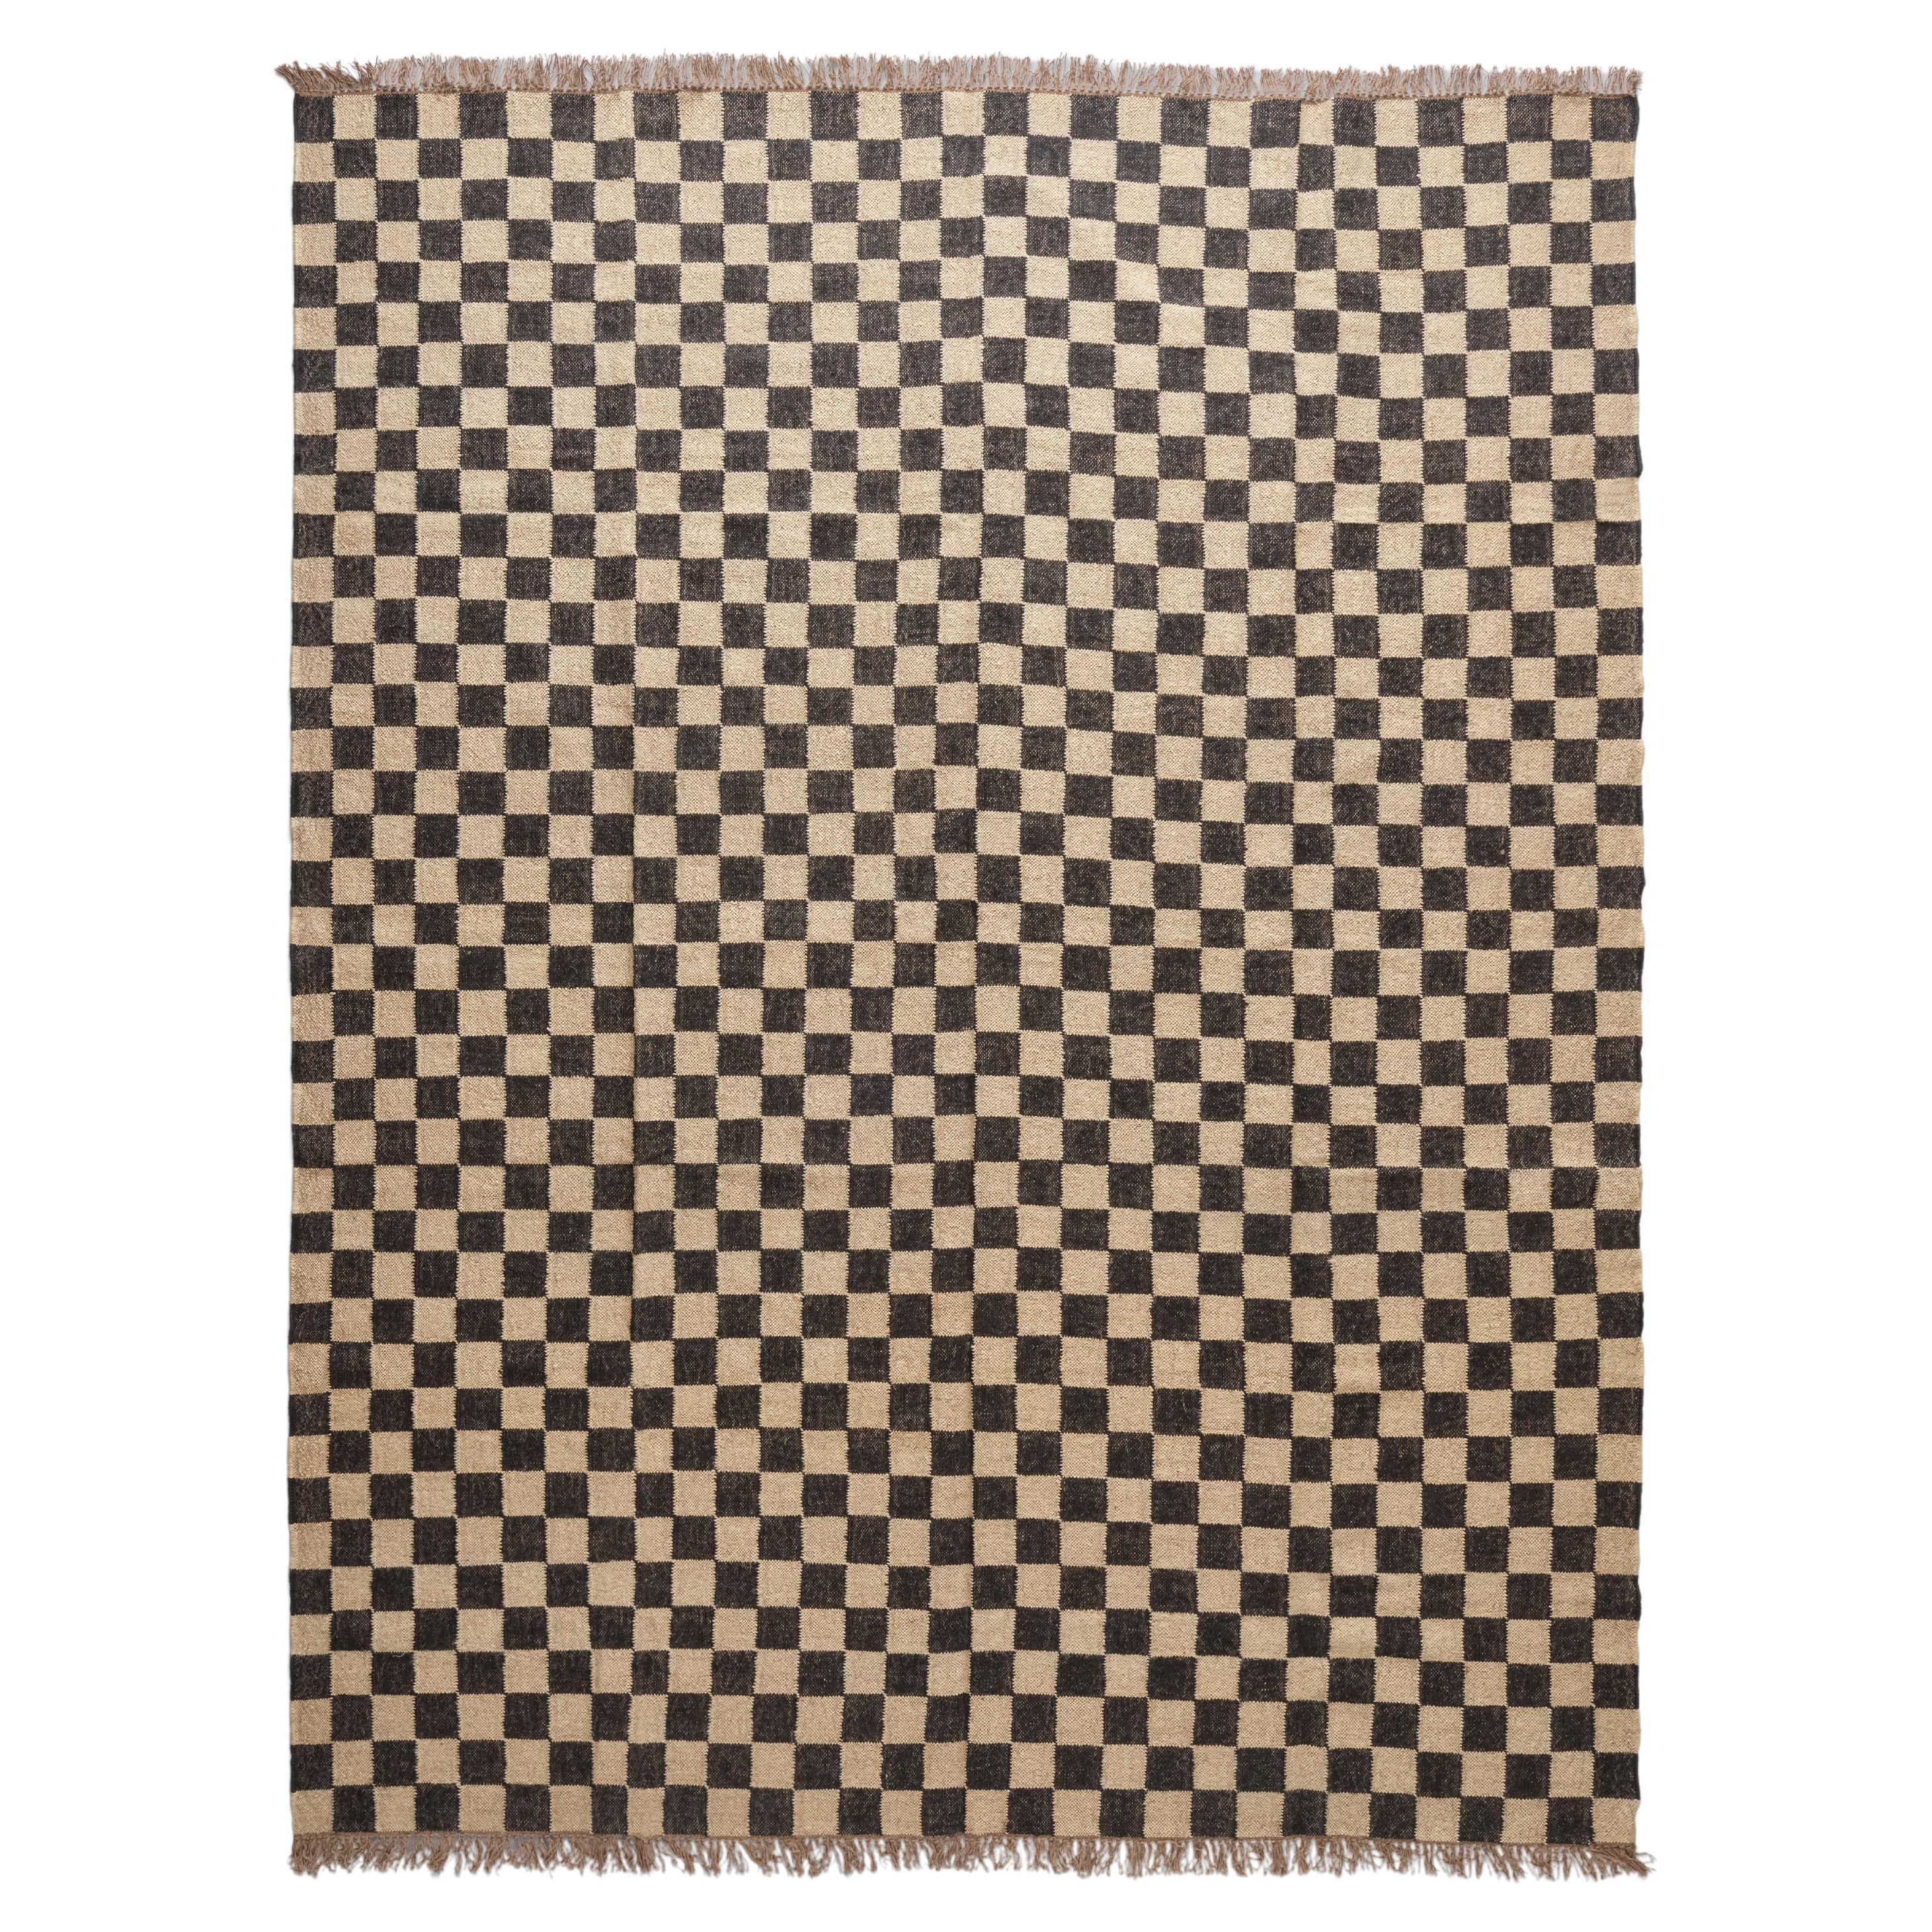 The Forsyth Checkerboard Rug - Off Black, 10x14 For Sale